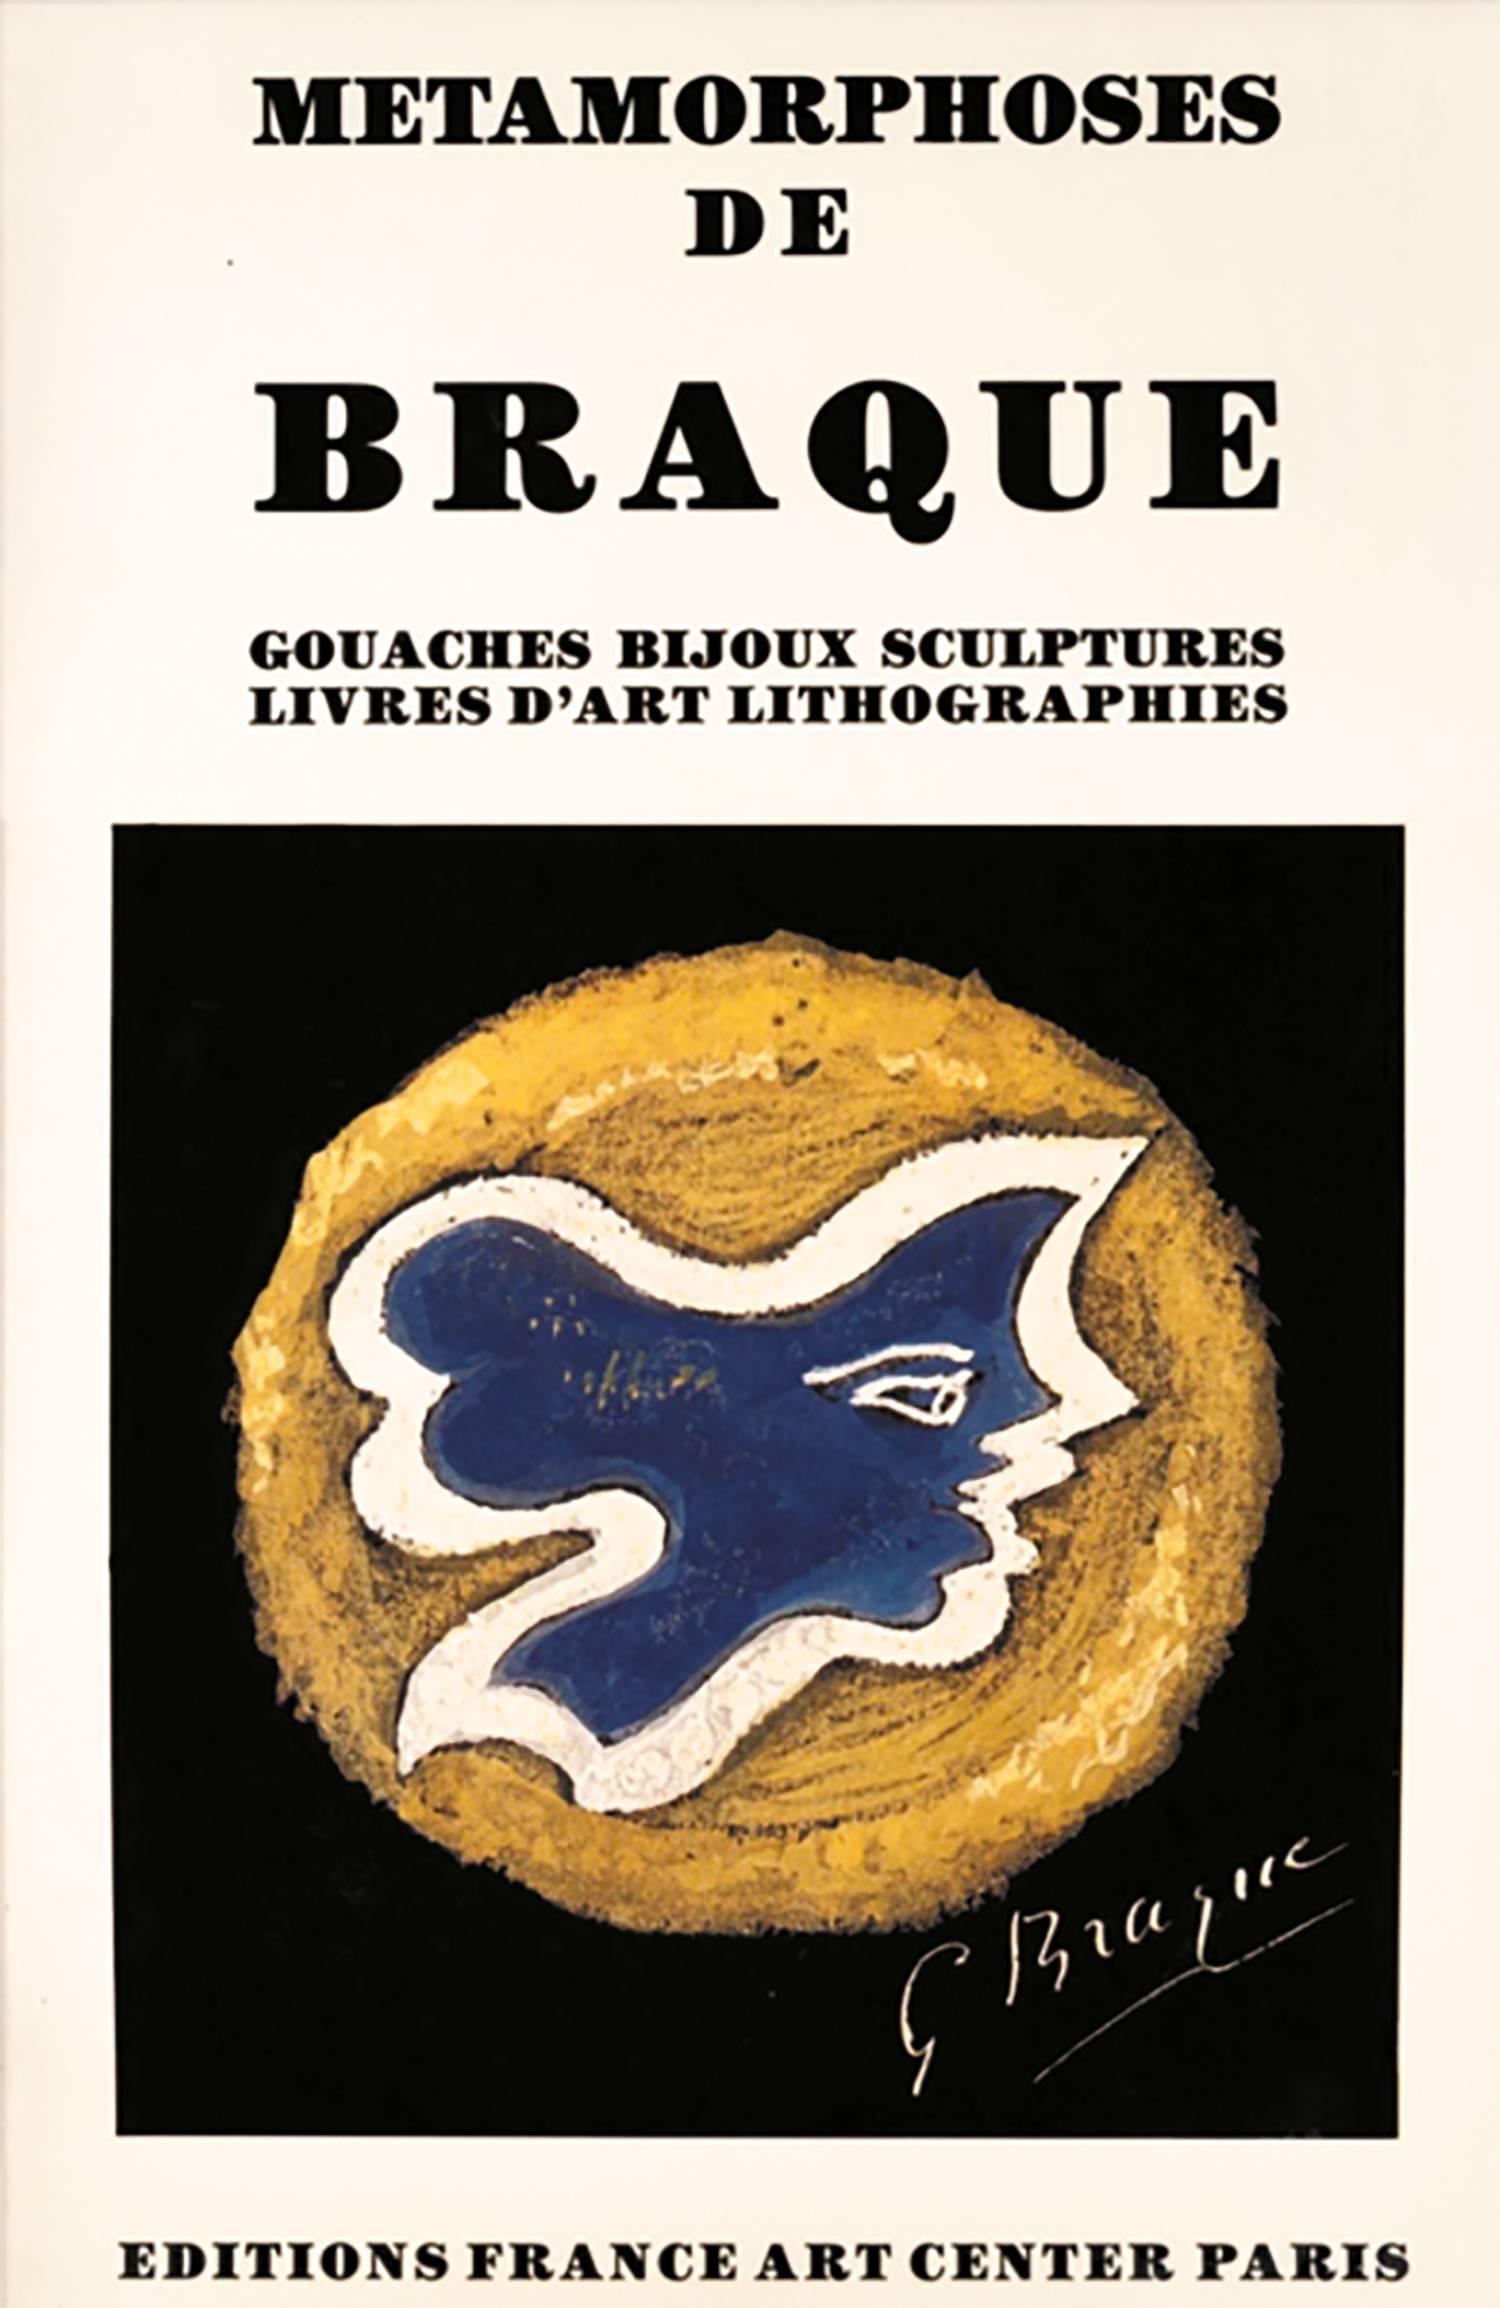 1963 Georges Braque “Halia” Gouache on Black Paper for the Braque Jewels 1